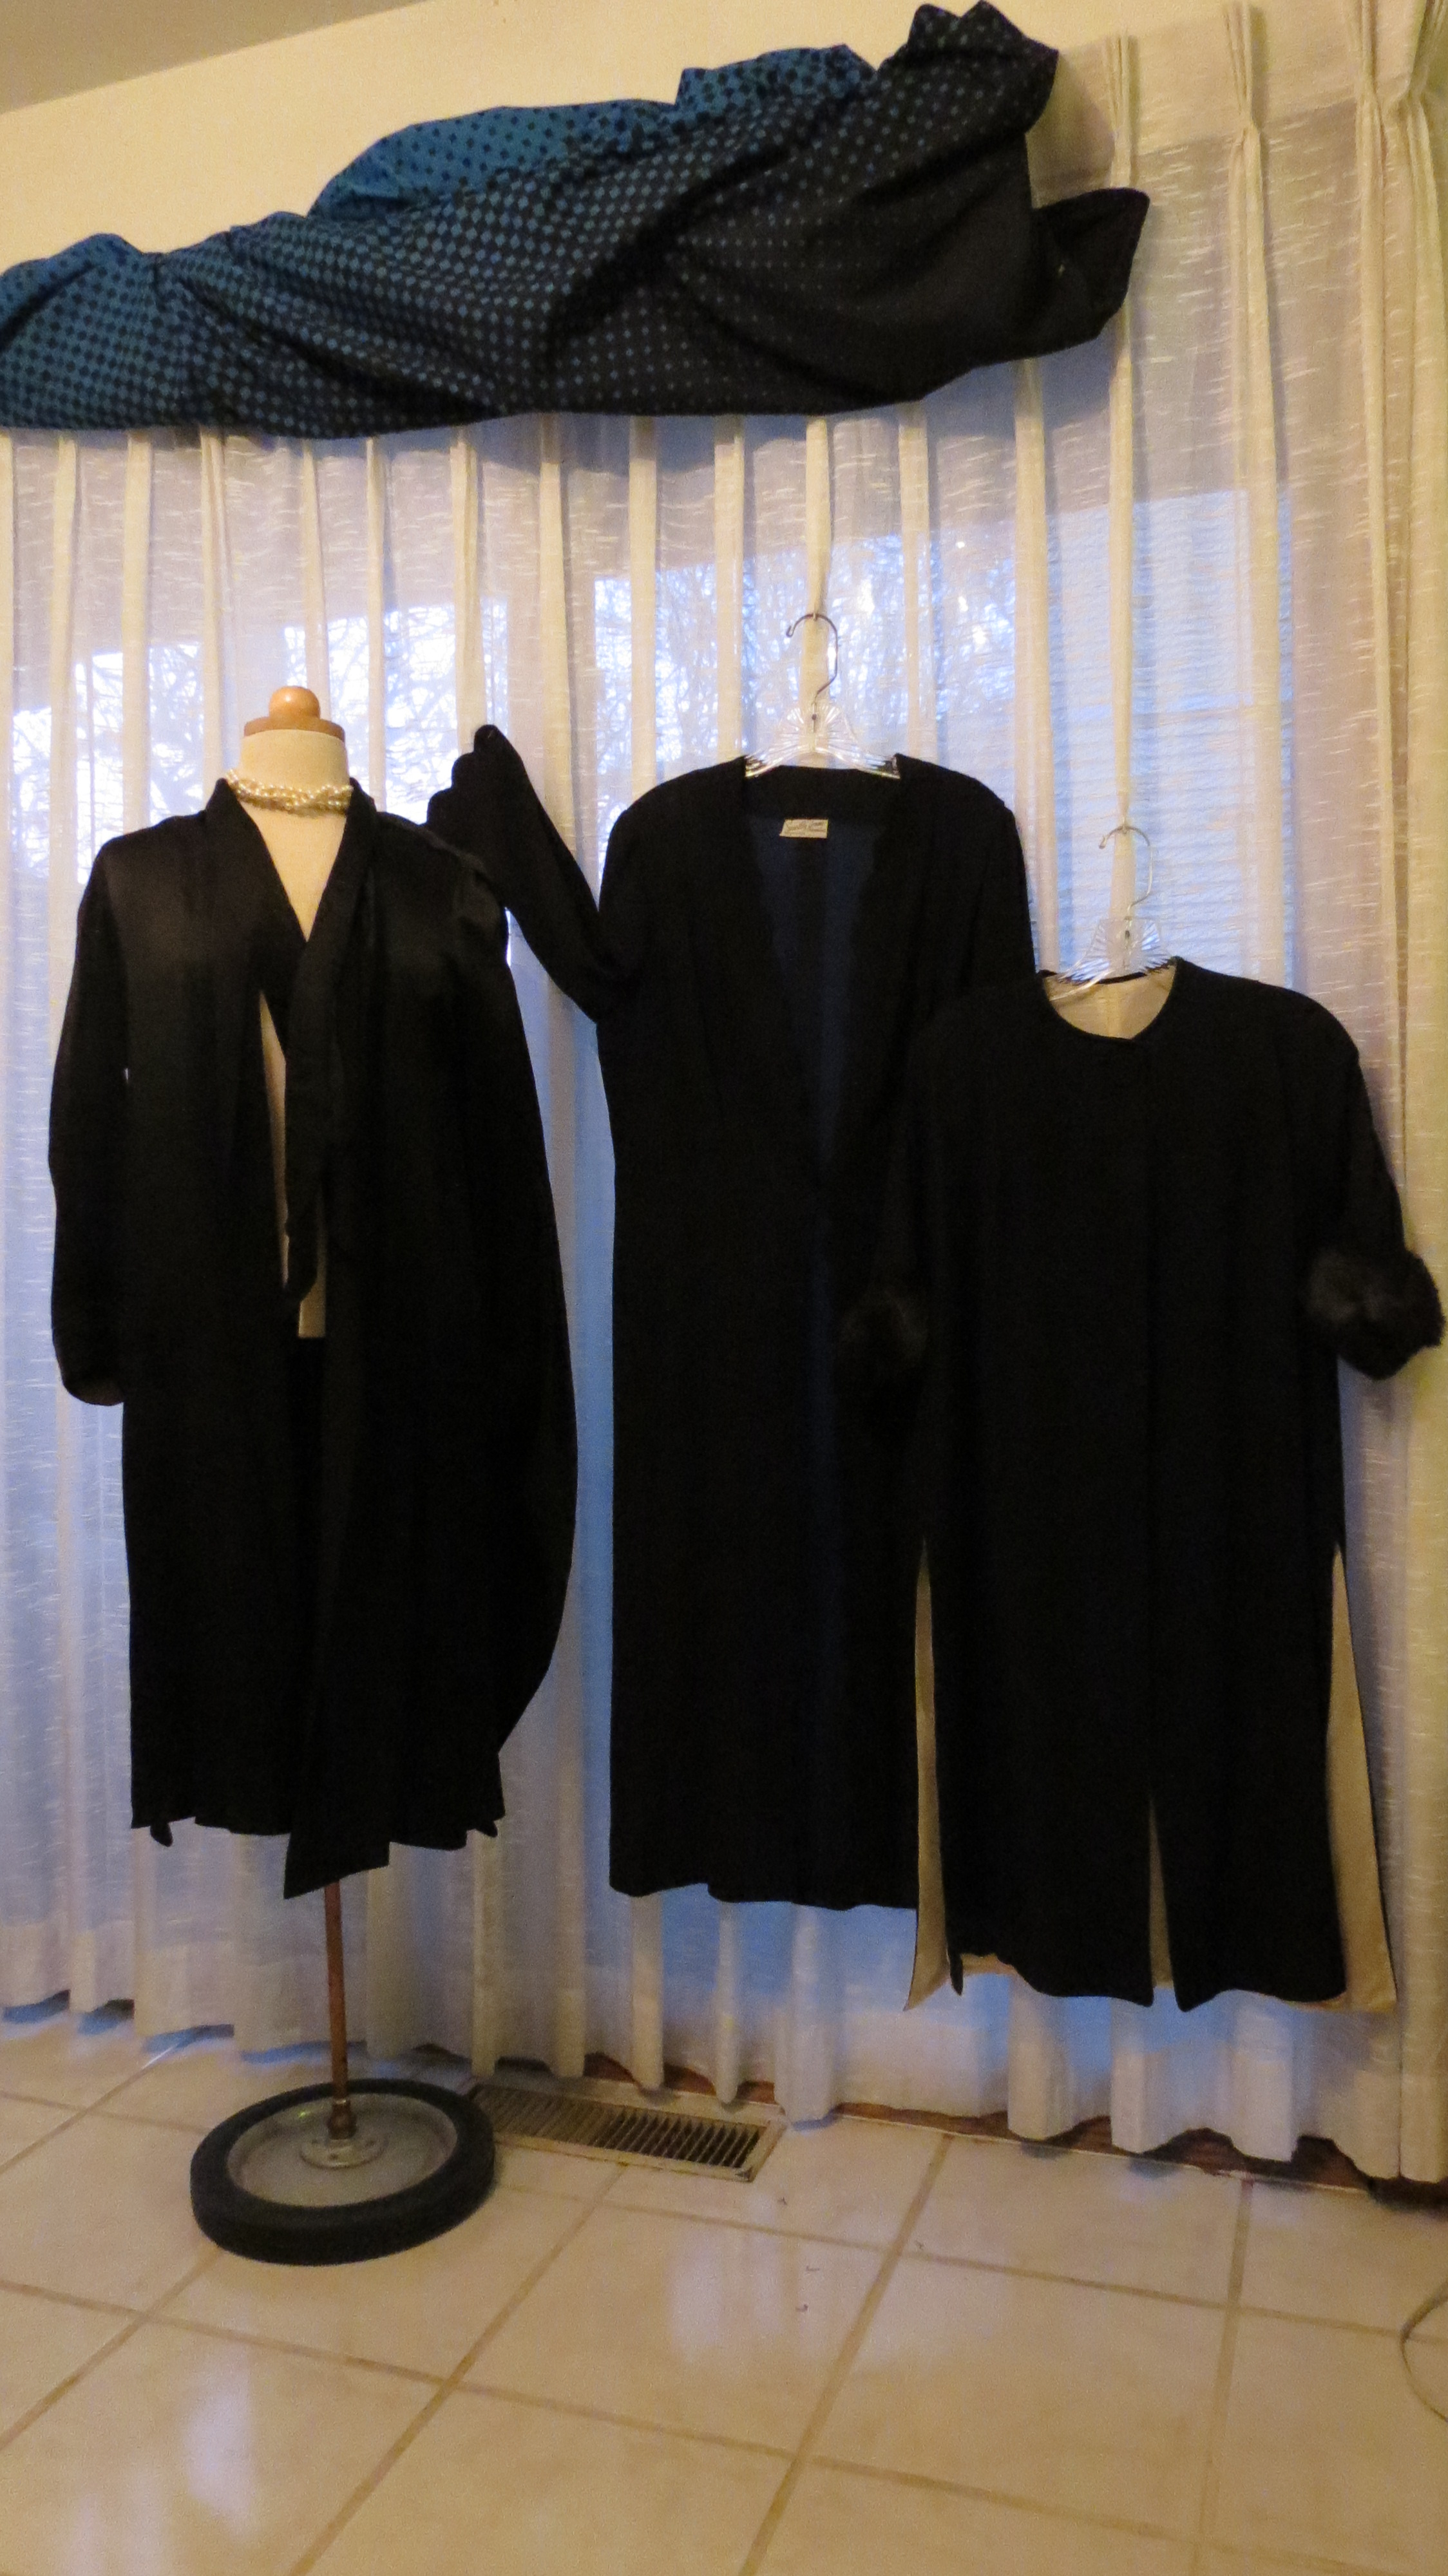 MY MOST QUIRKY, OLDEST EVENING COATS - FROM THE 1930'S & 1940'S